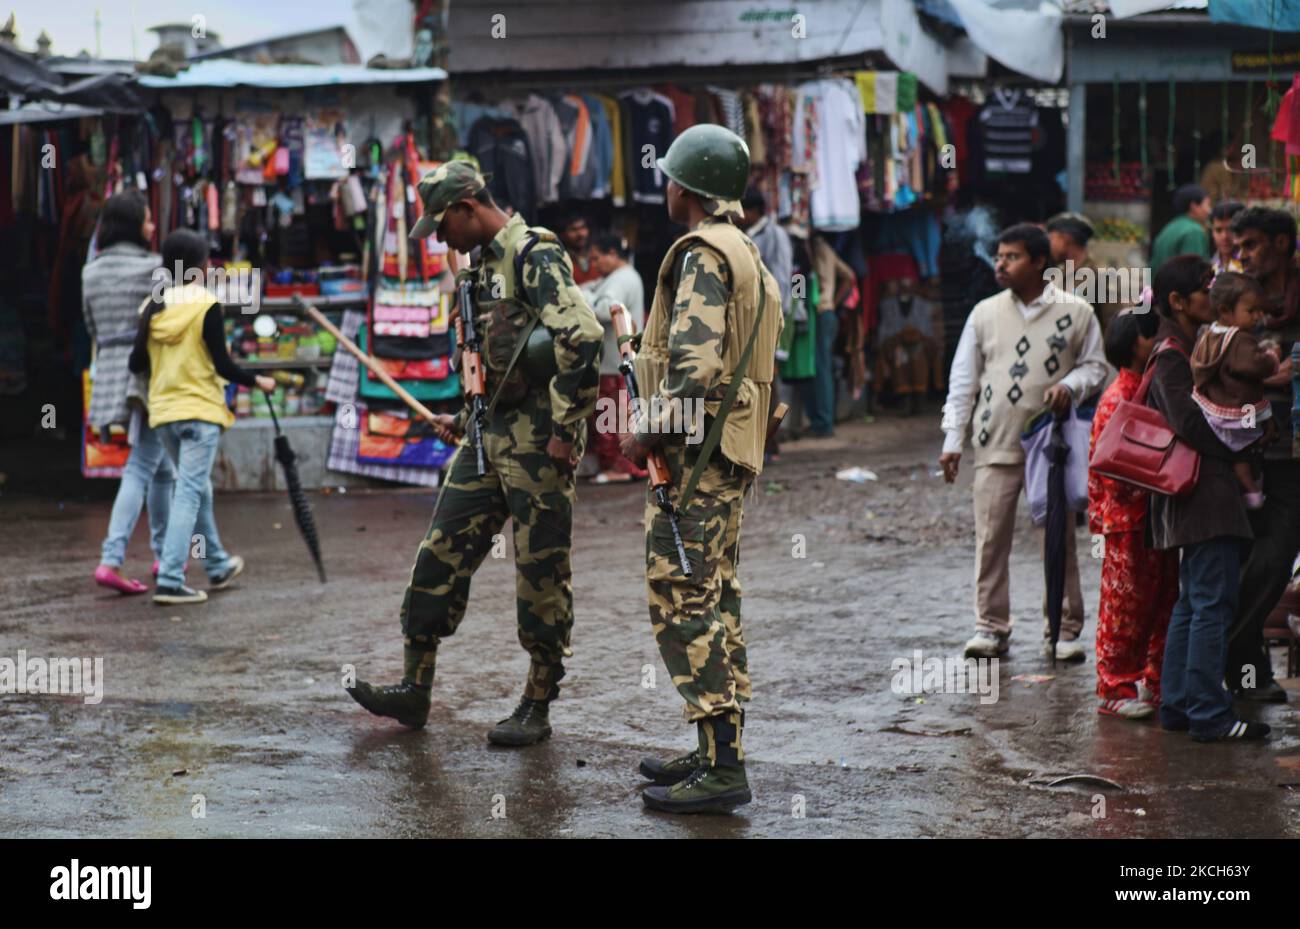 Indian soldiers patrol the streets of Darjeeling to quell unrest and keep the peace shortly after a large anti-government rally in Darjeeling, West Bengal, India, on May 29, 2010. (Photo by Creative Touch Imaging Ltd./NurPhoto) Stock Photo